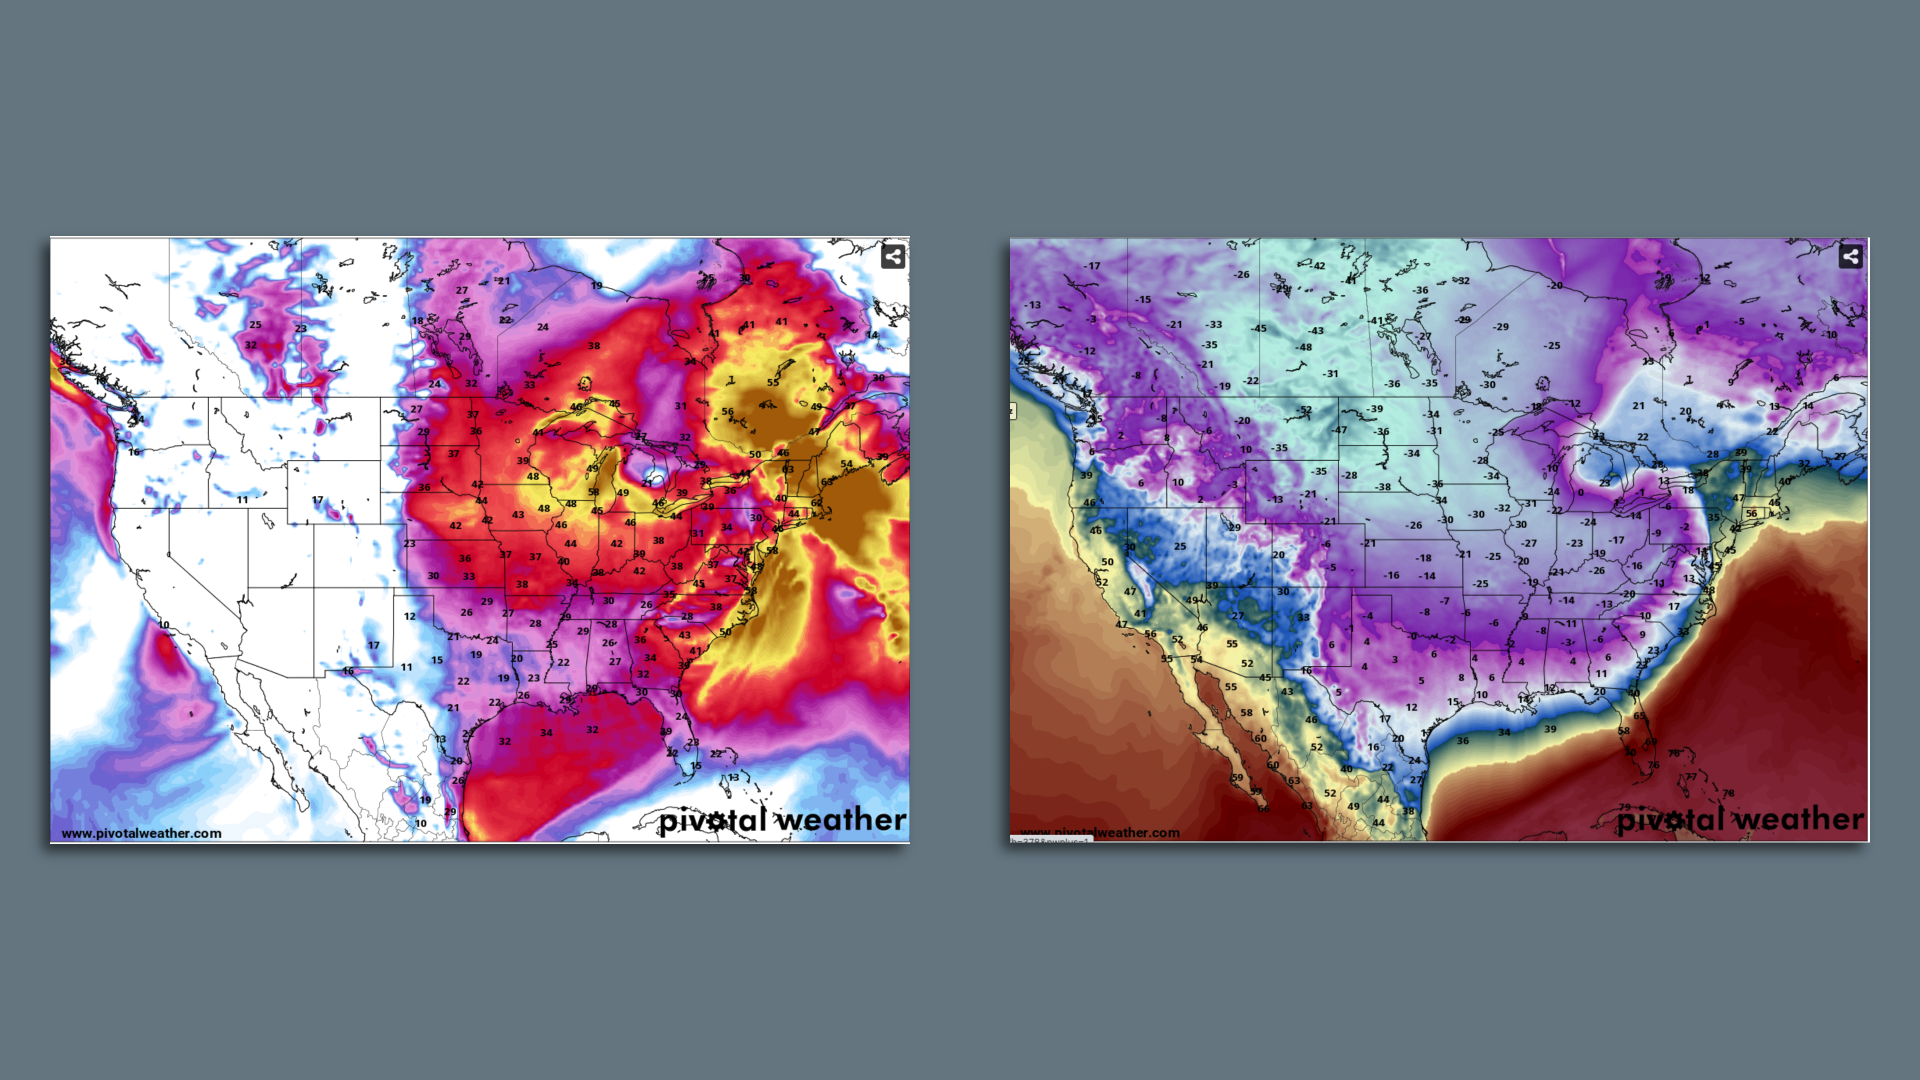 Winds and temperatures associated with the bomb cyclone, shown side-by-side.